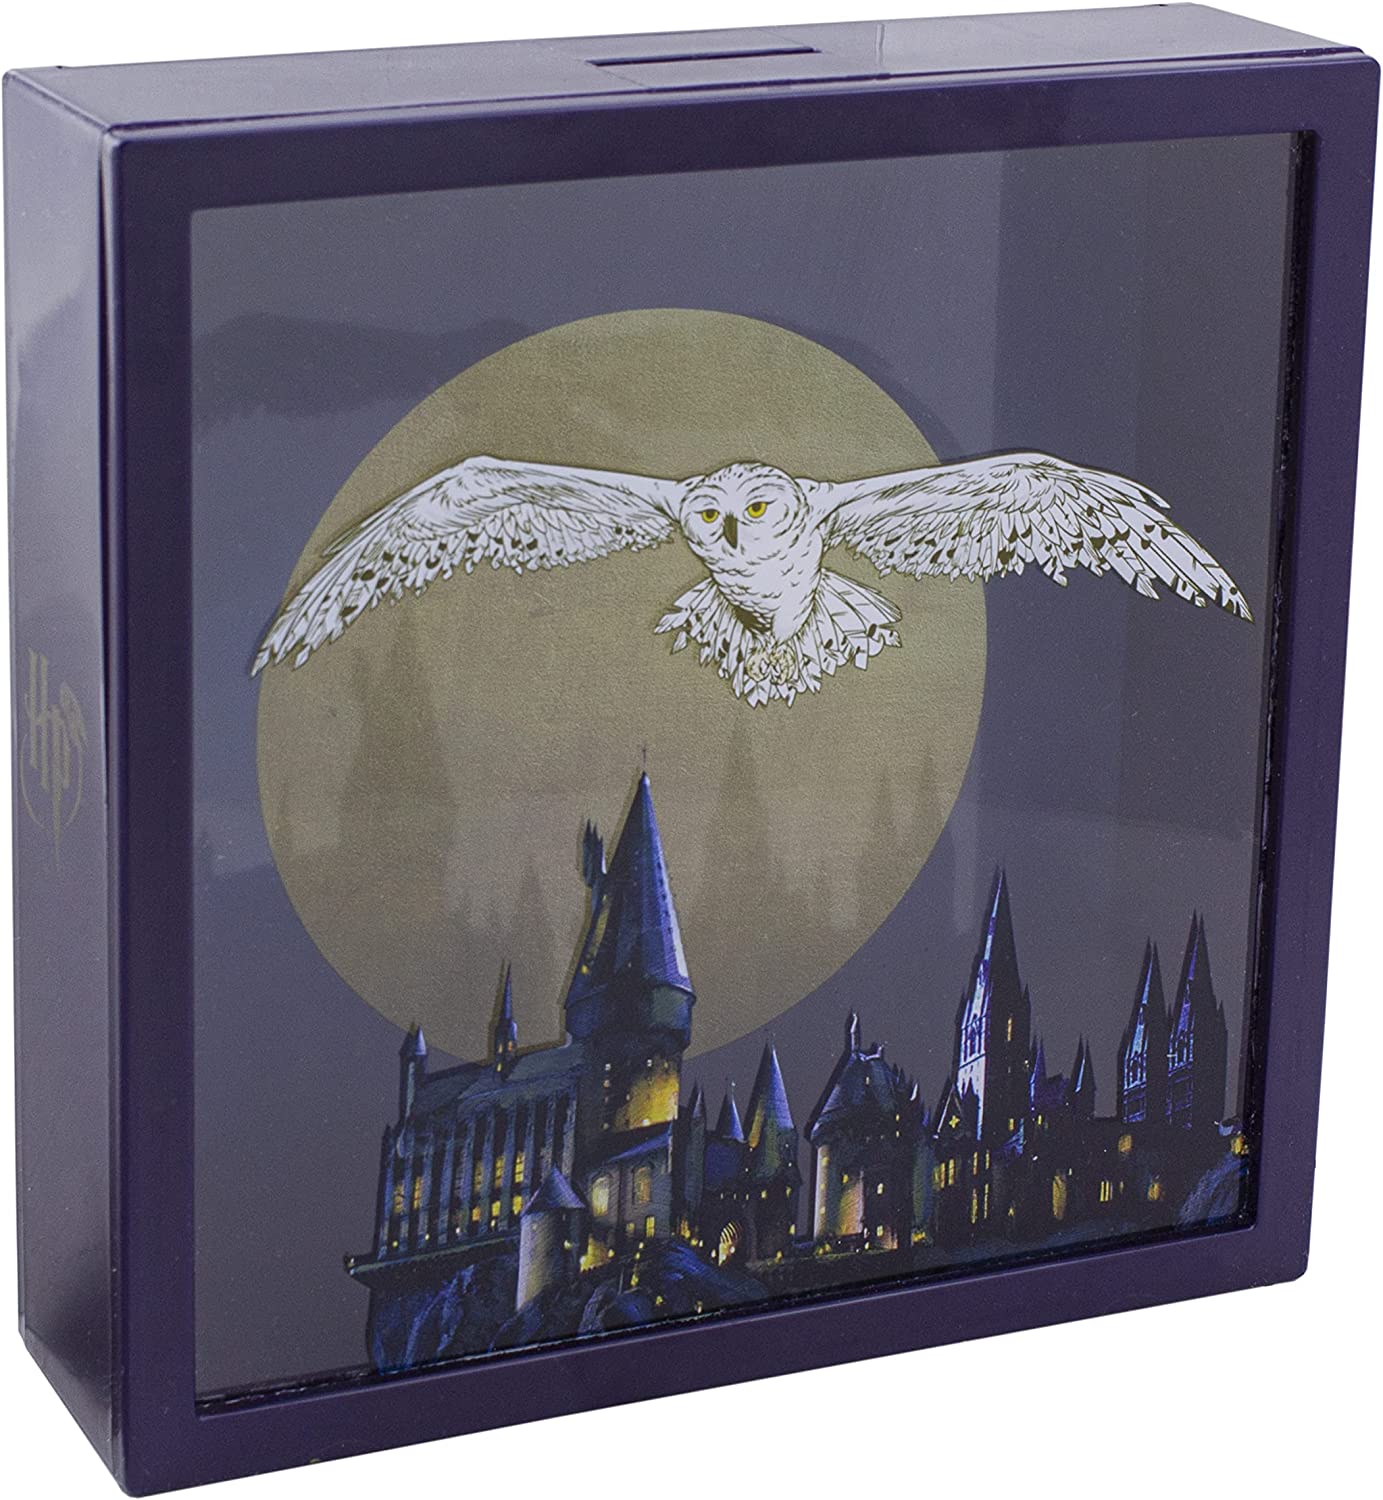 Money box with 3D effect Harry Potter - Hedwig